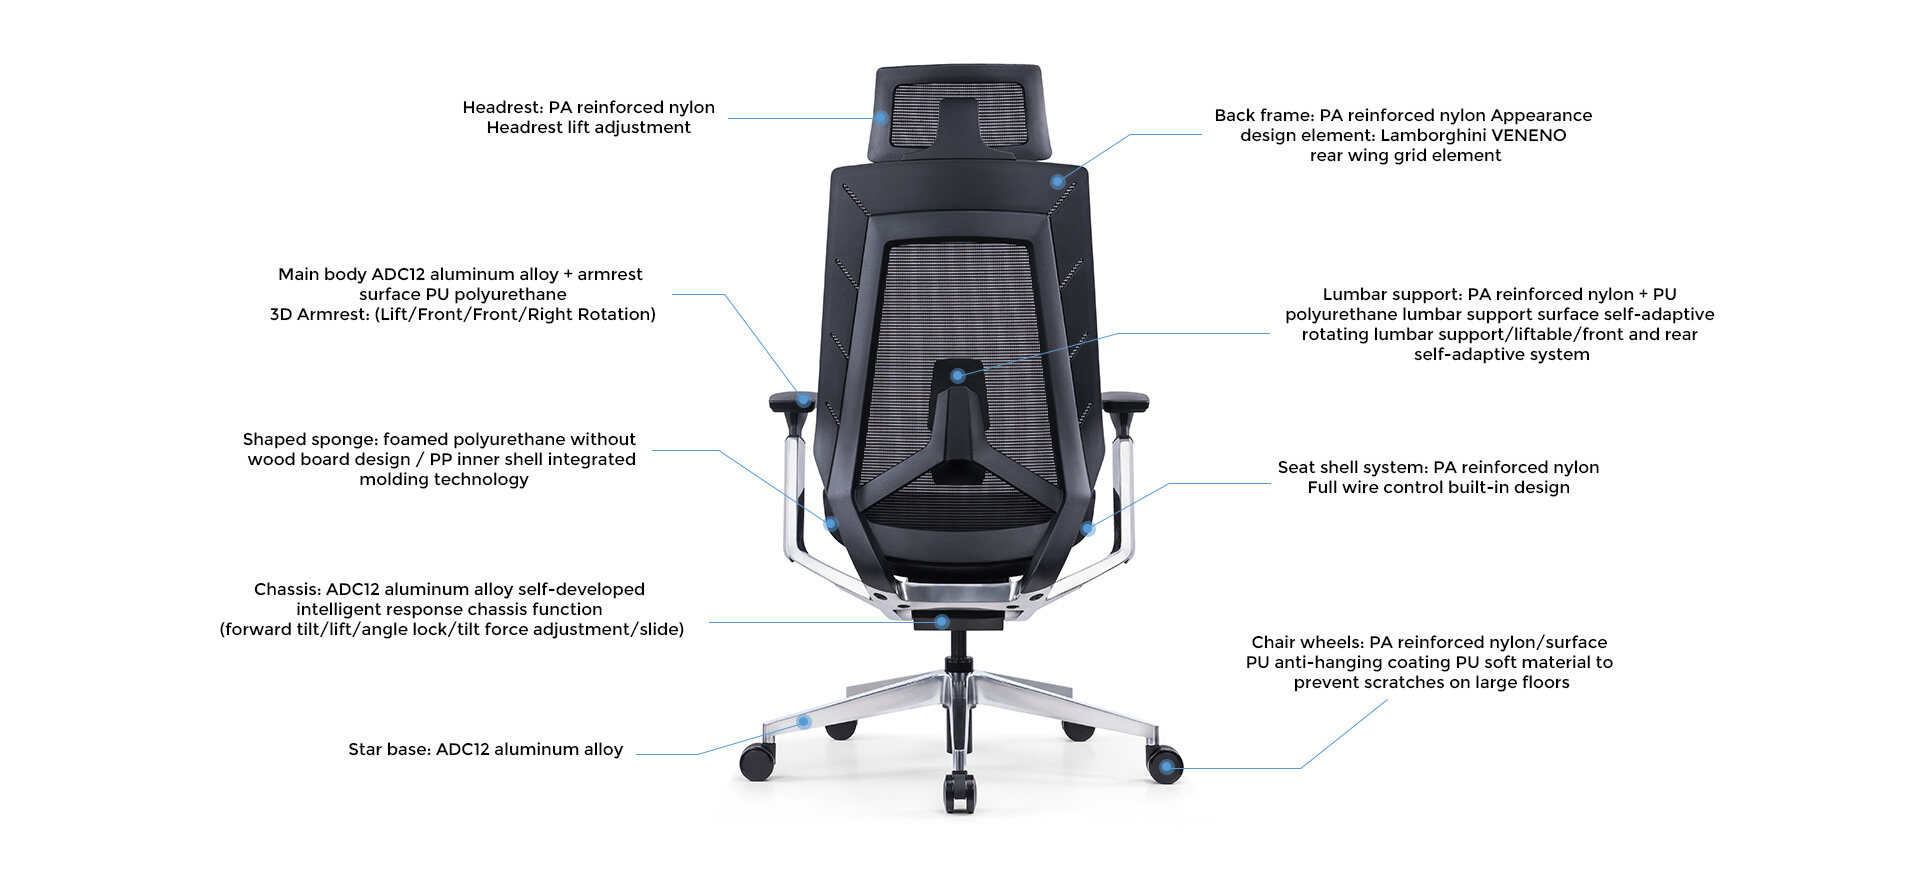 massage office chair,adjustable office chair,ergonomic home office chair